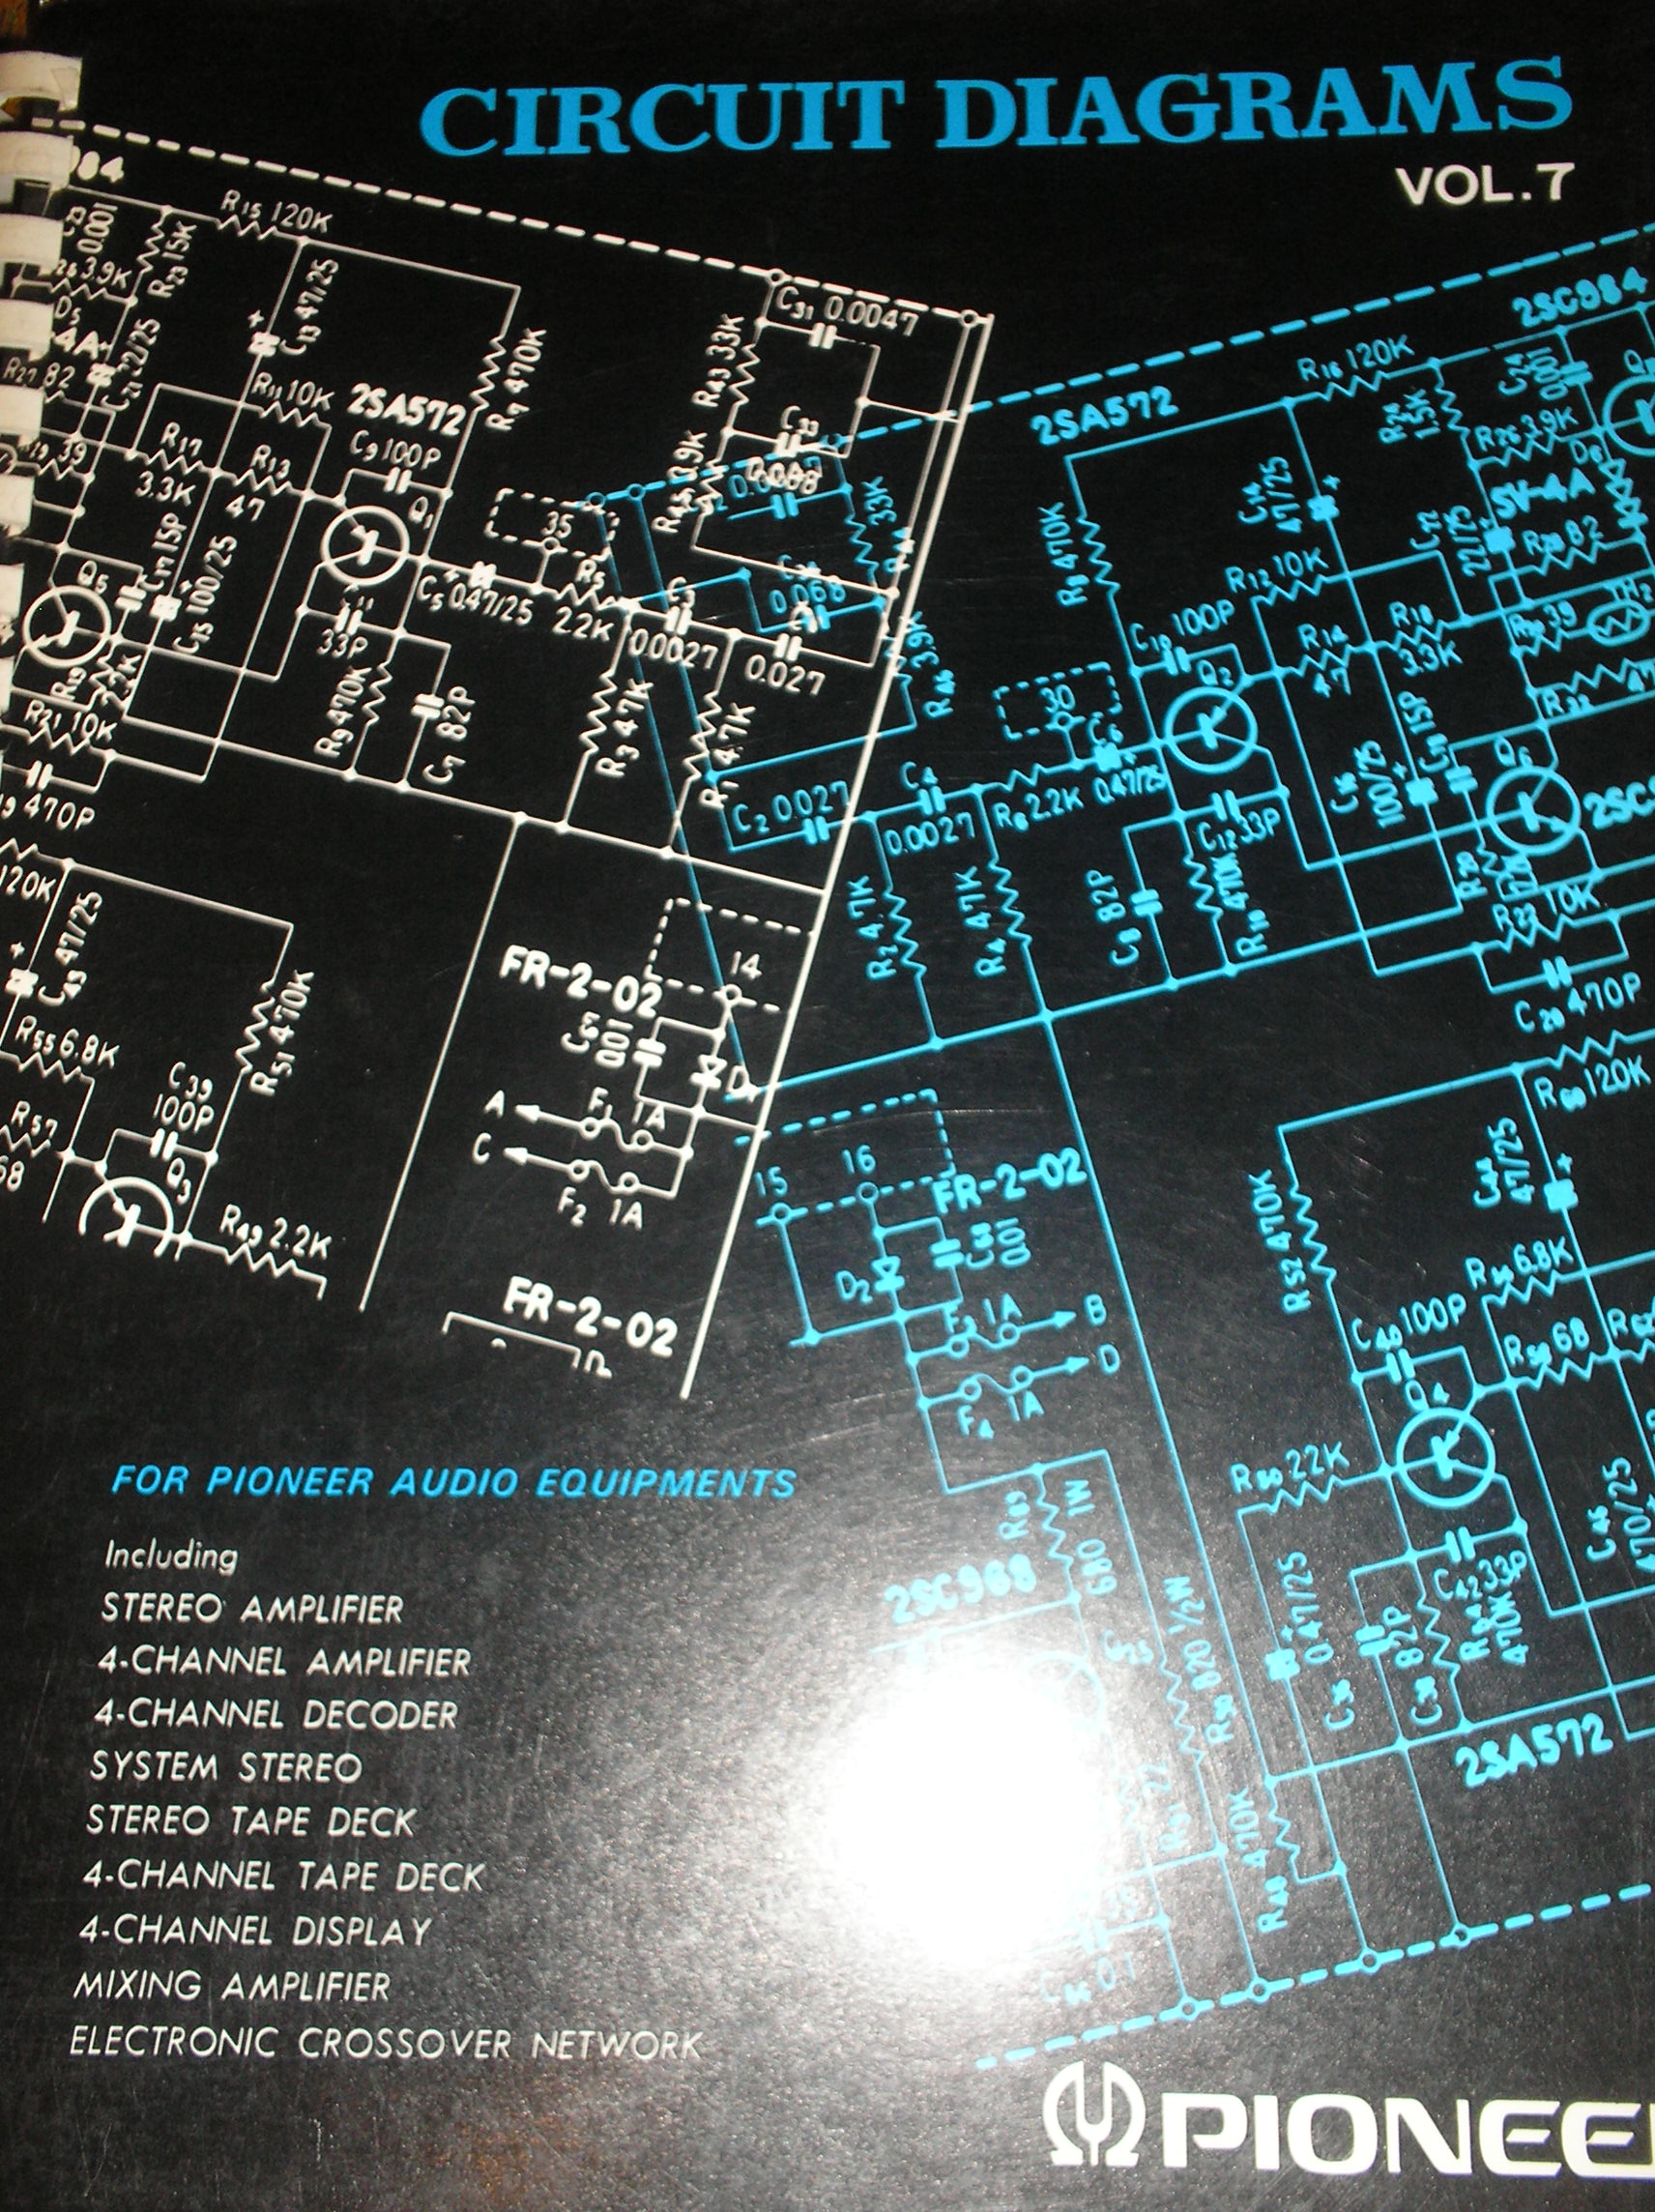 4000A Prelude Stereo System fold out schematics.   Book 7